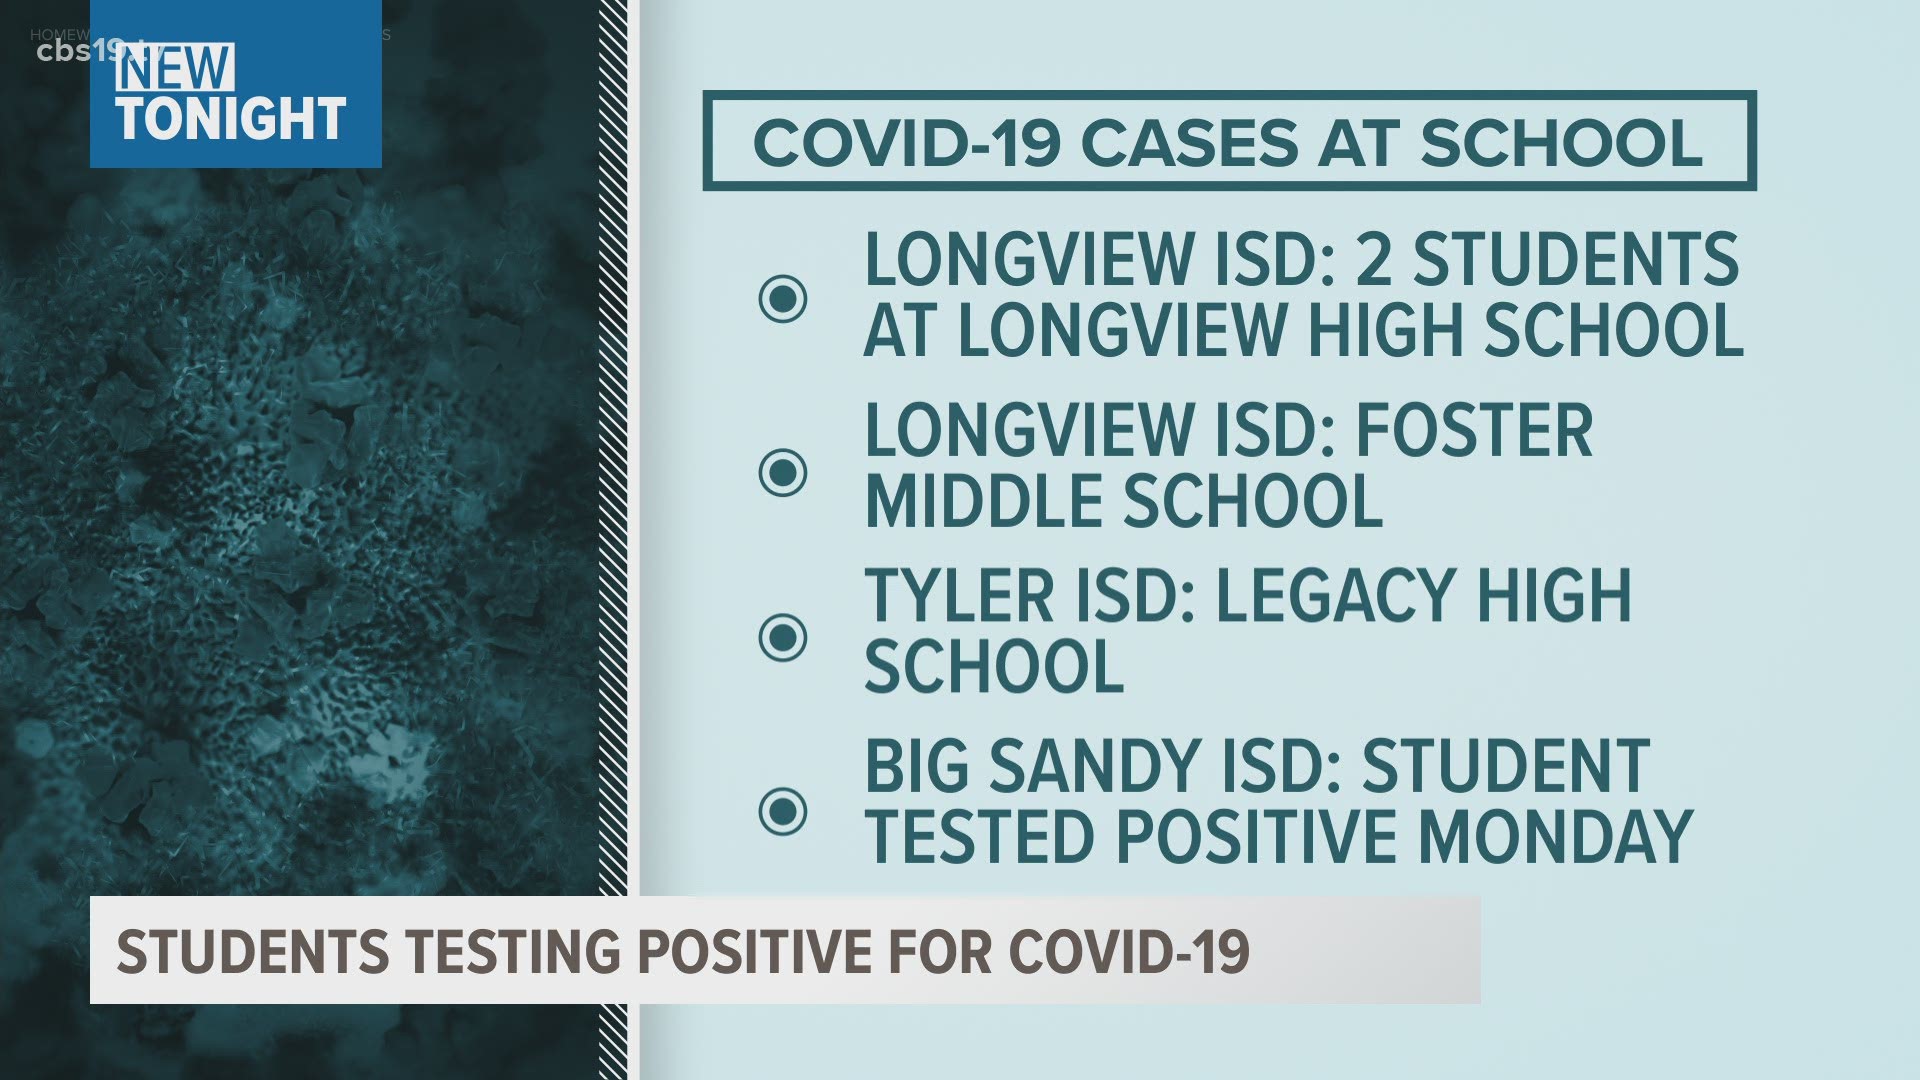 There have been positive tests at Tyler ISD, Longview ISD and Big Sandy.